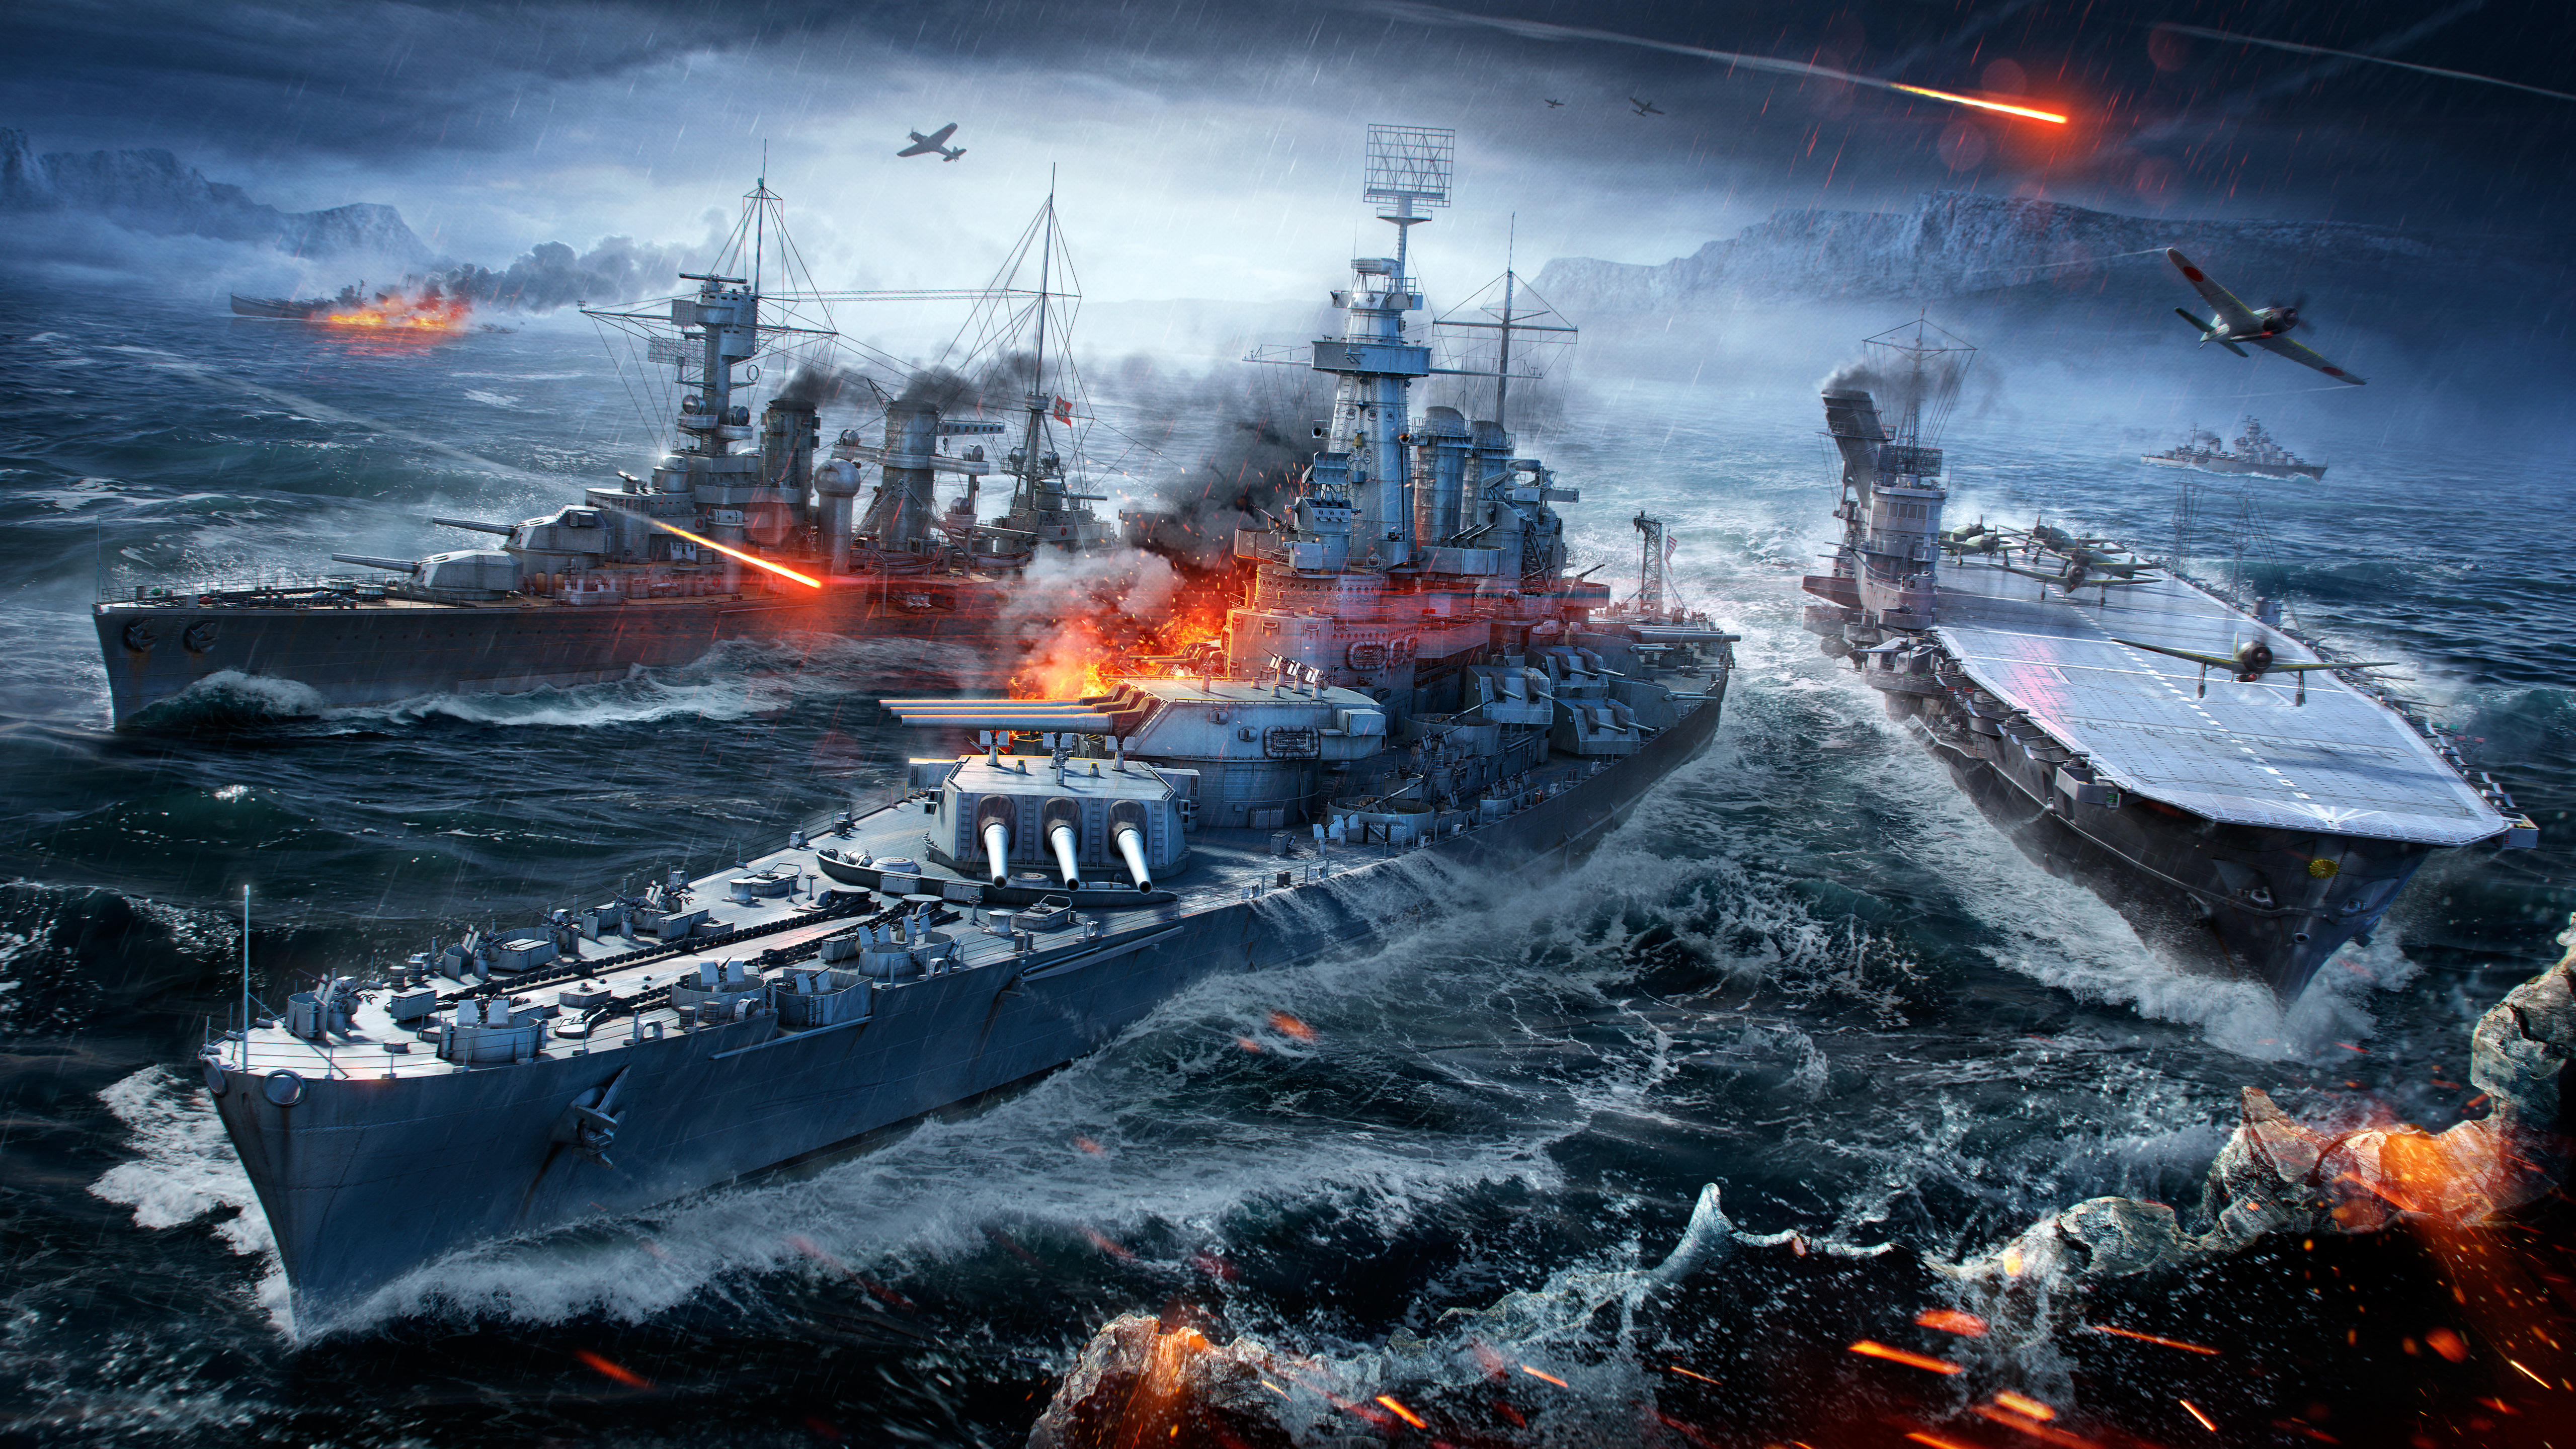 Naval 4K wallpaper for your desktop or mobile screen free and easy to download